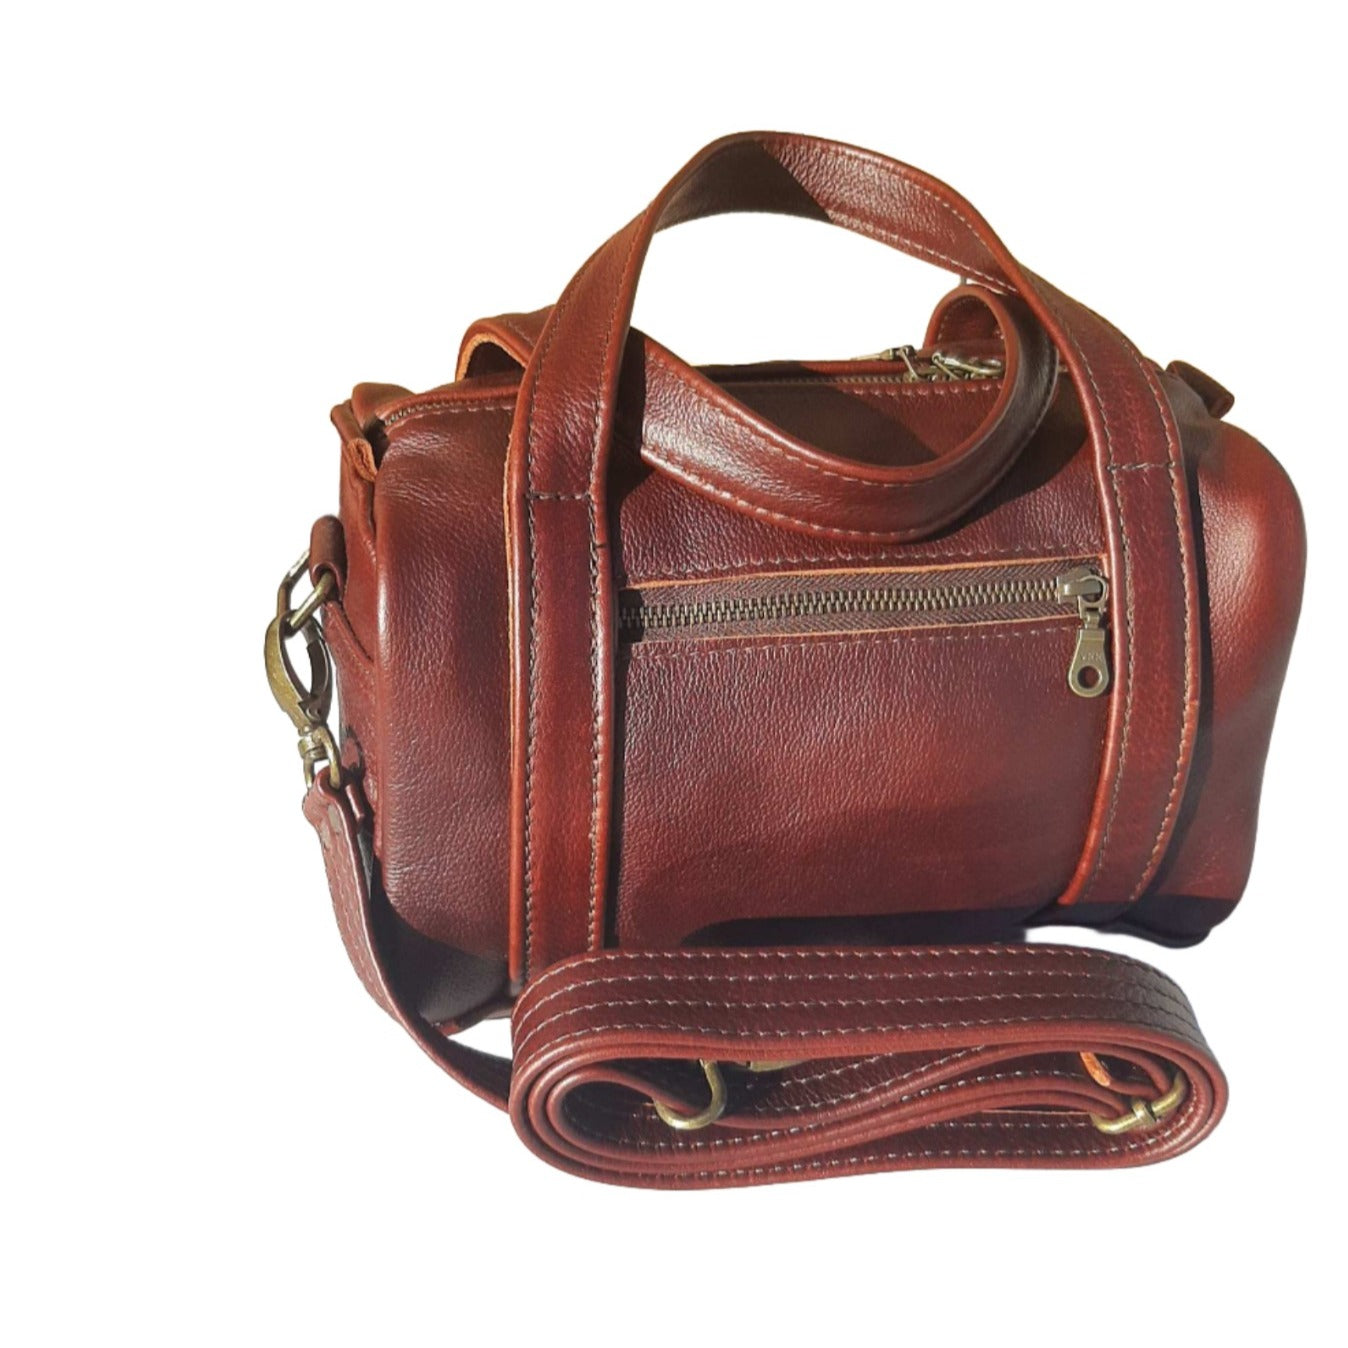 Alex Bathroom bags with Strap in dark  tan colour  from Cape Masai Leather 